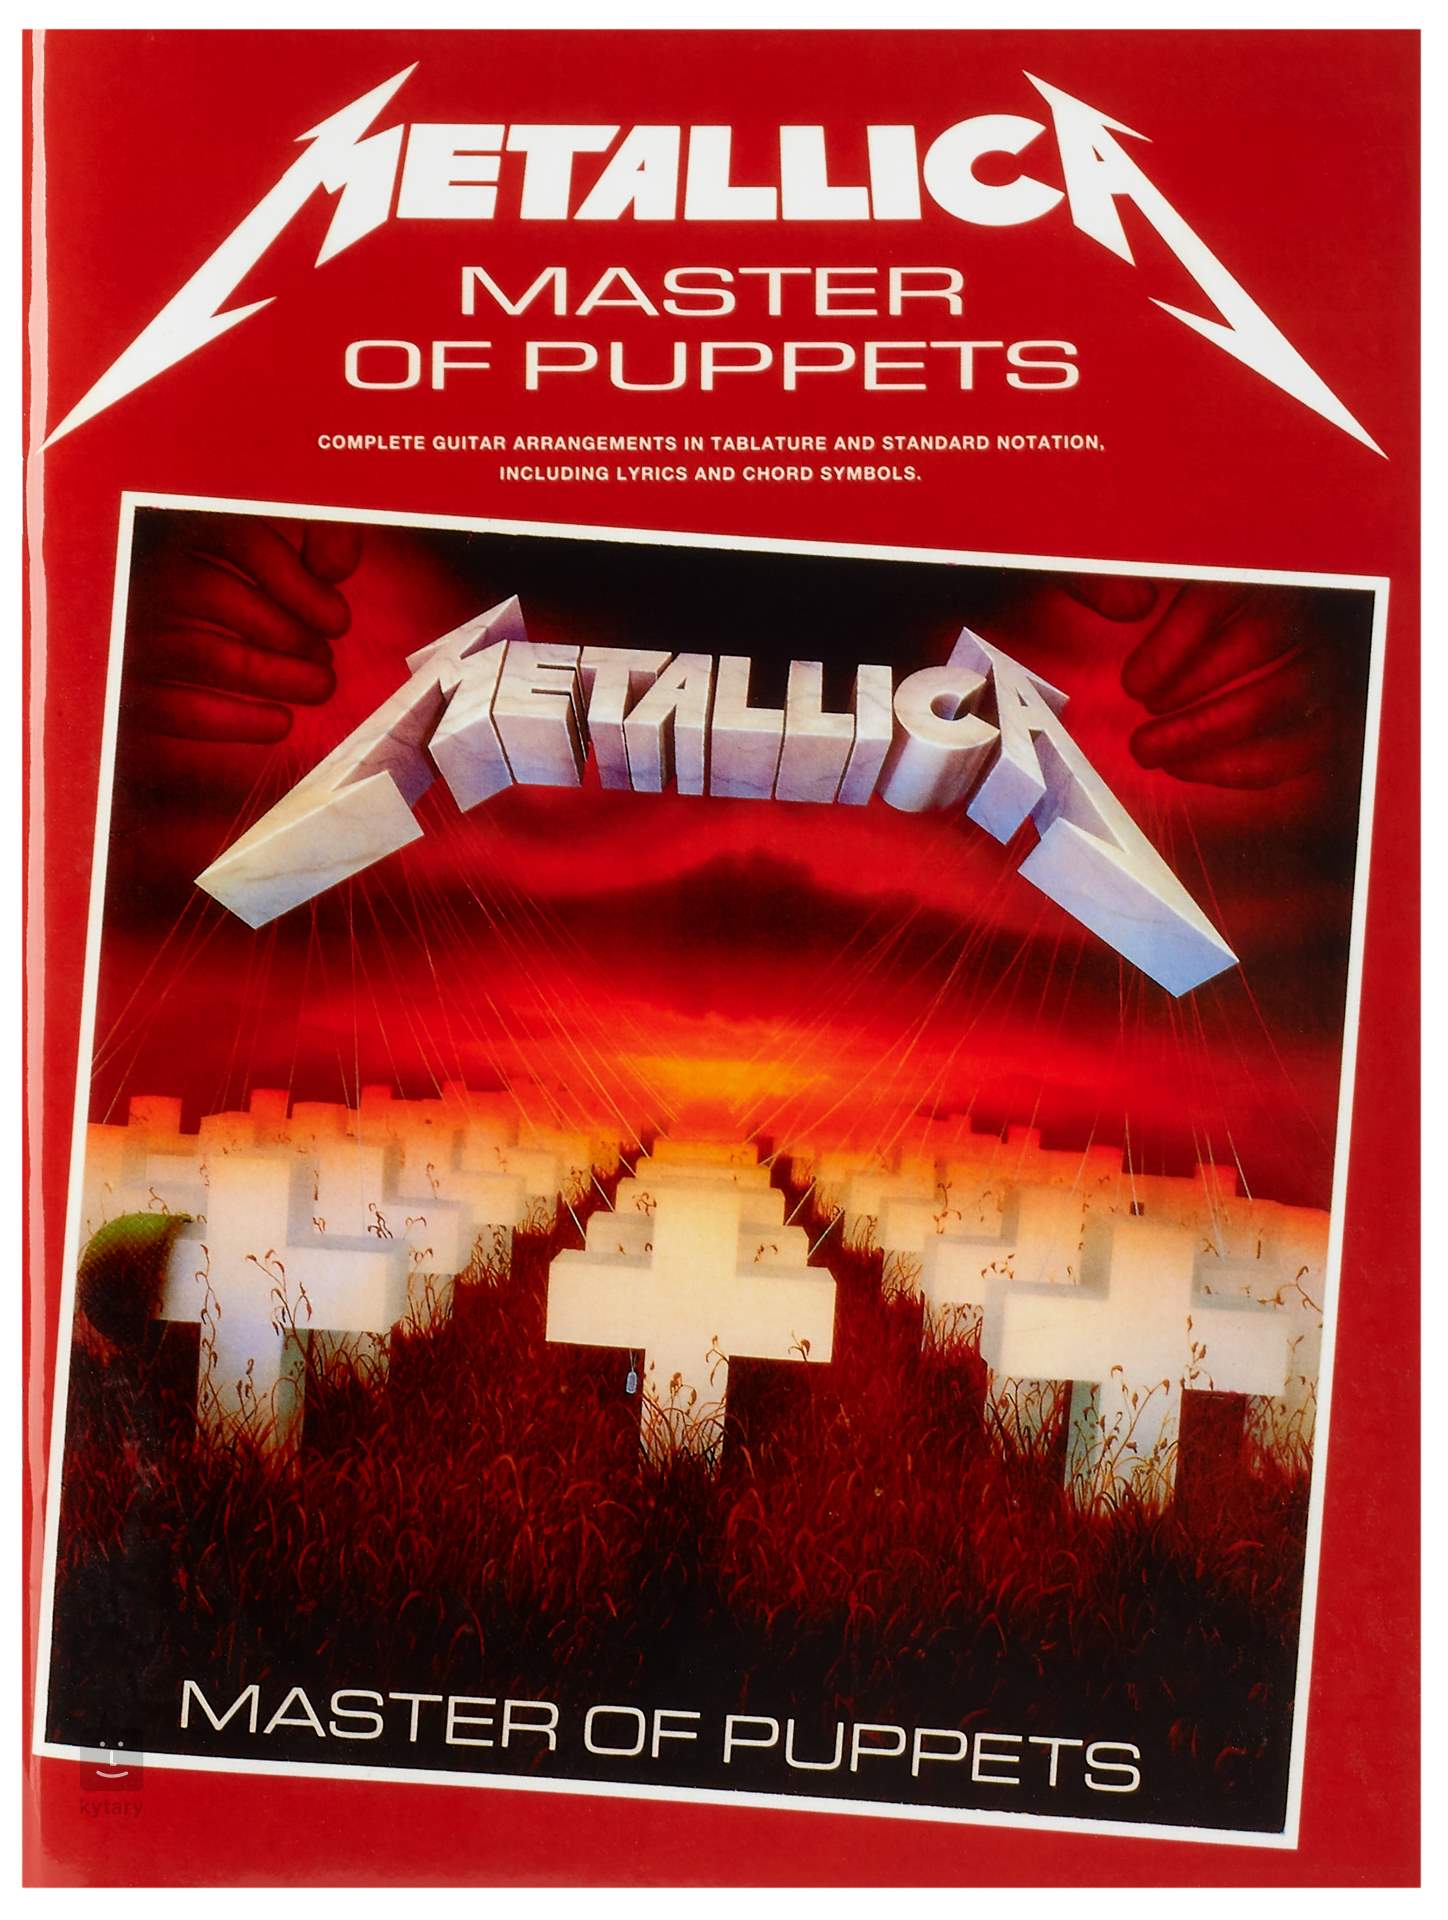 Master of puppets текст. Металлика мастер оф папетс. Metallica Master of Puppets poster. Постер Master of Puppets. Master of Puppets Ноты.